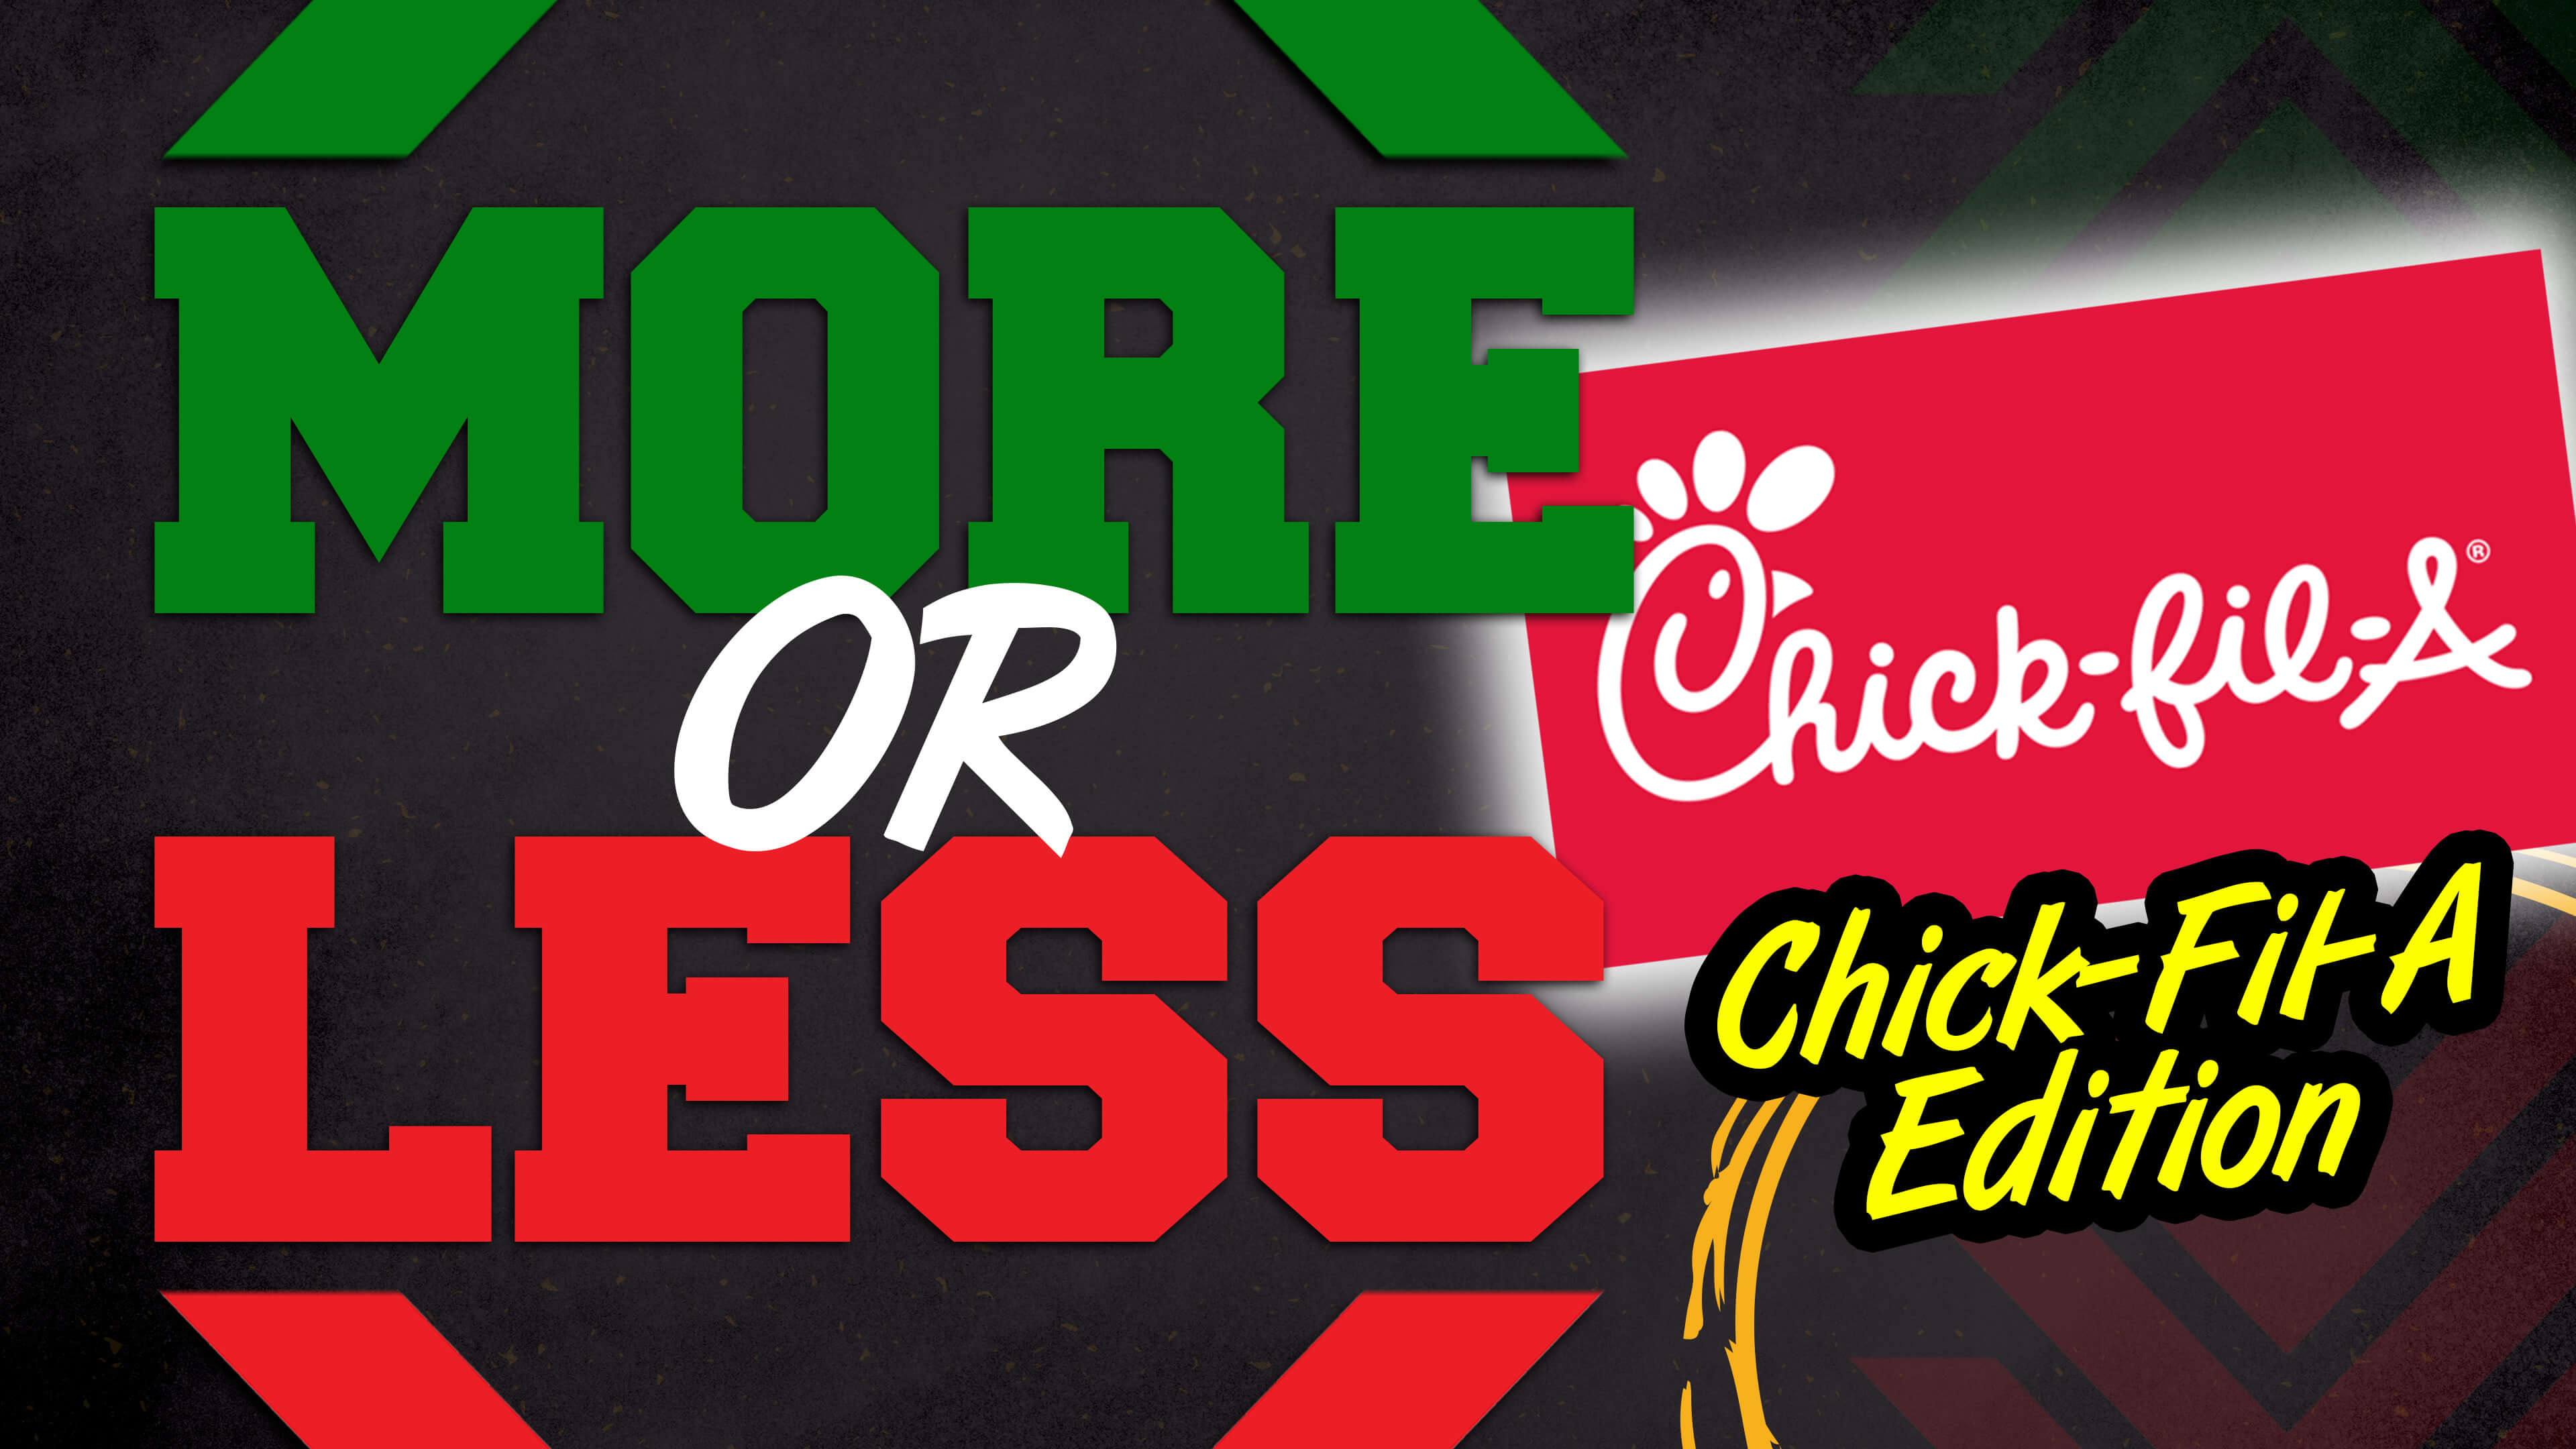 More or Less: Chick-Fil-A Edition